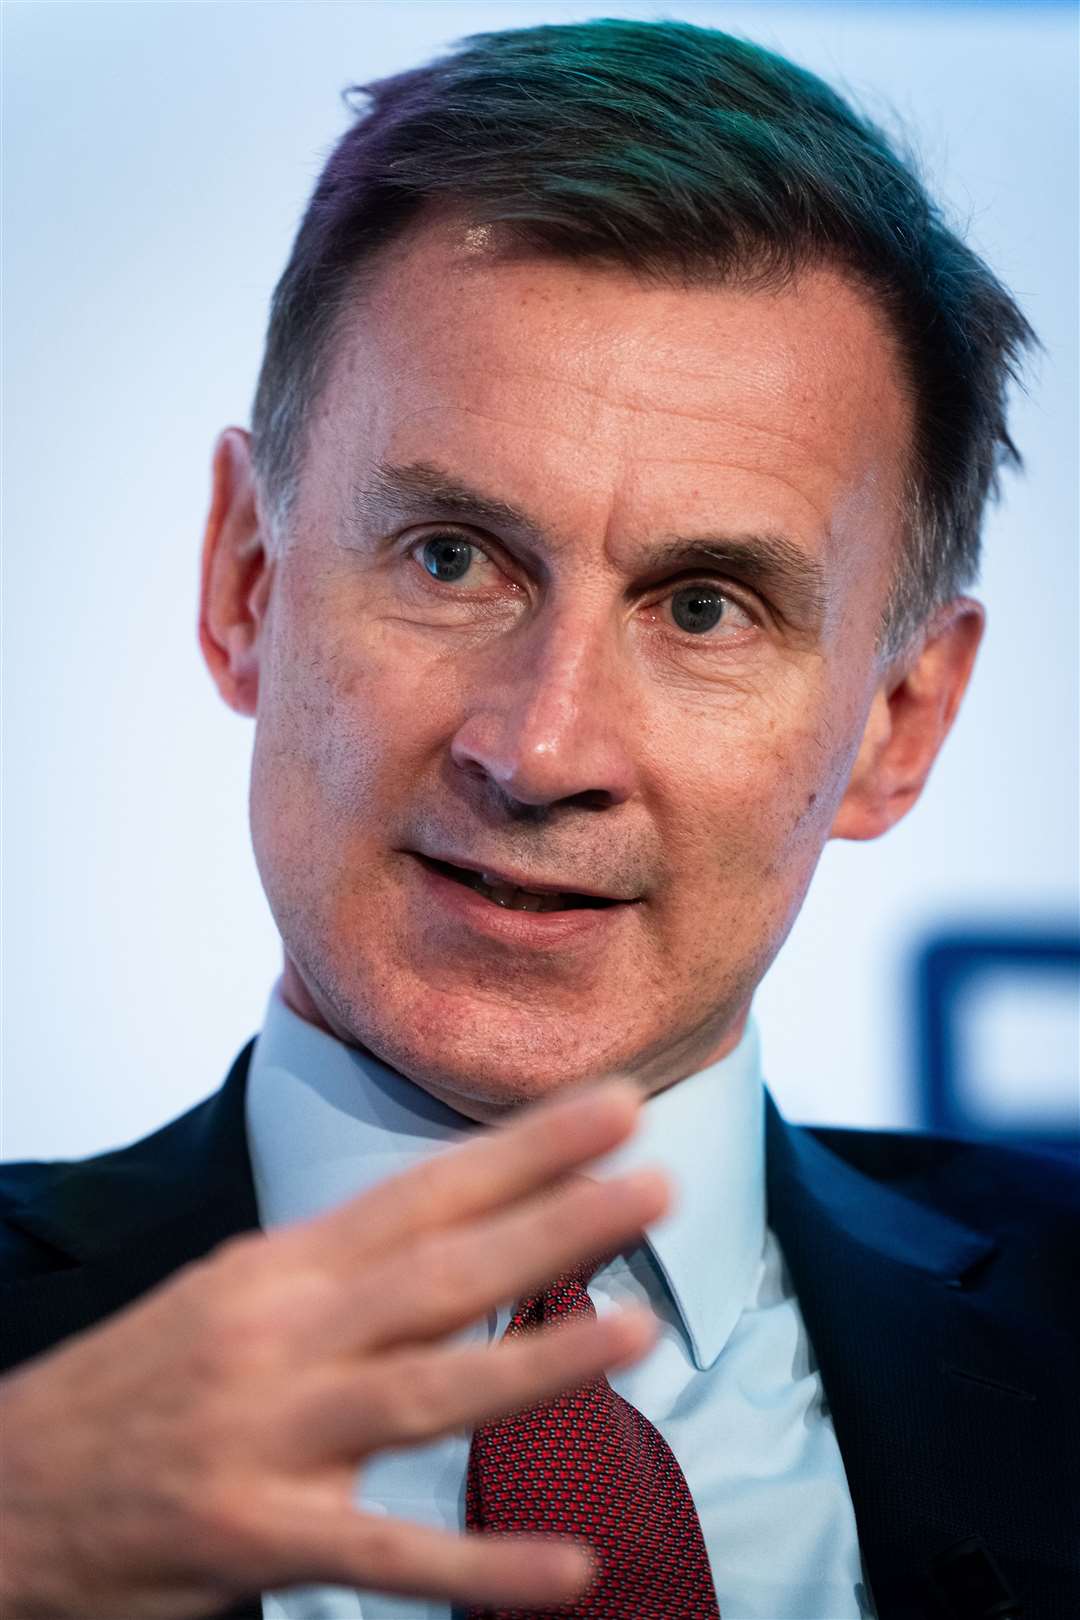 Chancellor Jeremy Hunt has said inflation and higher interest rates are behind the GDP fall (PA Media)